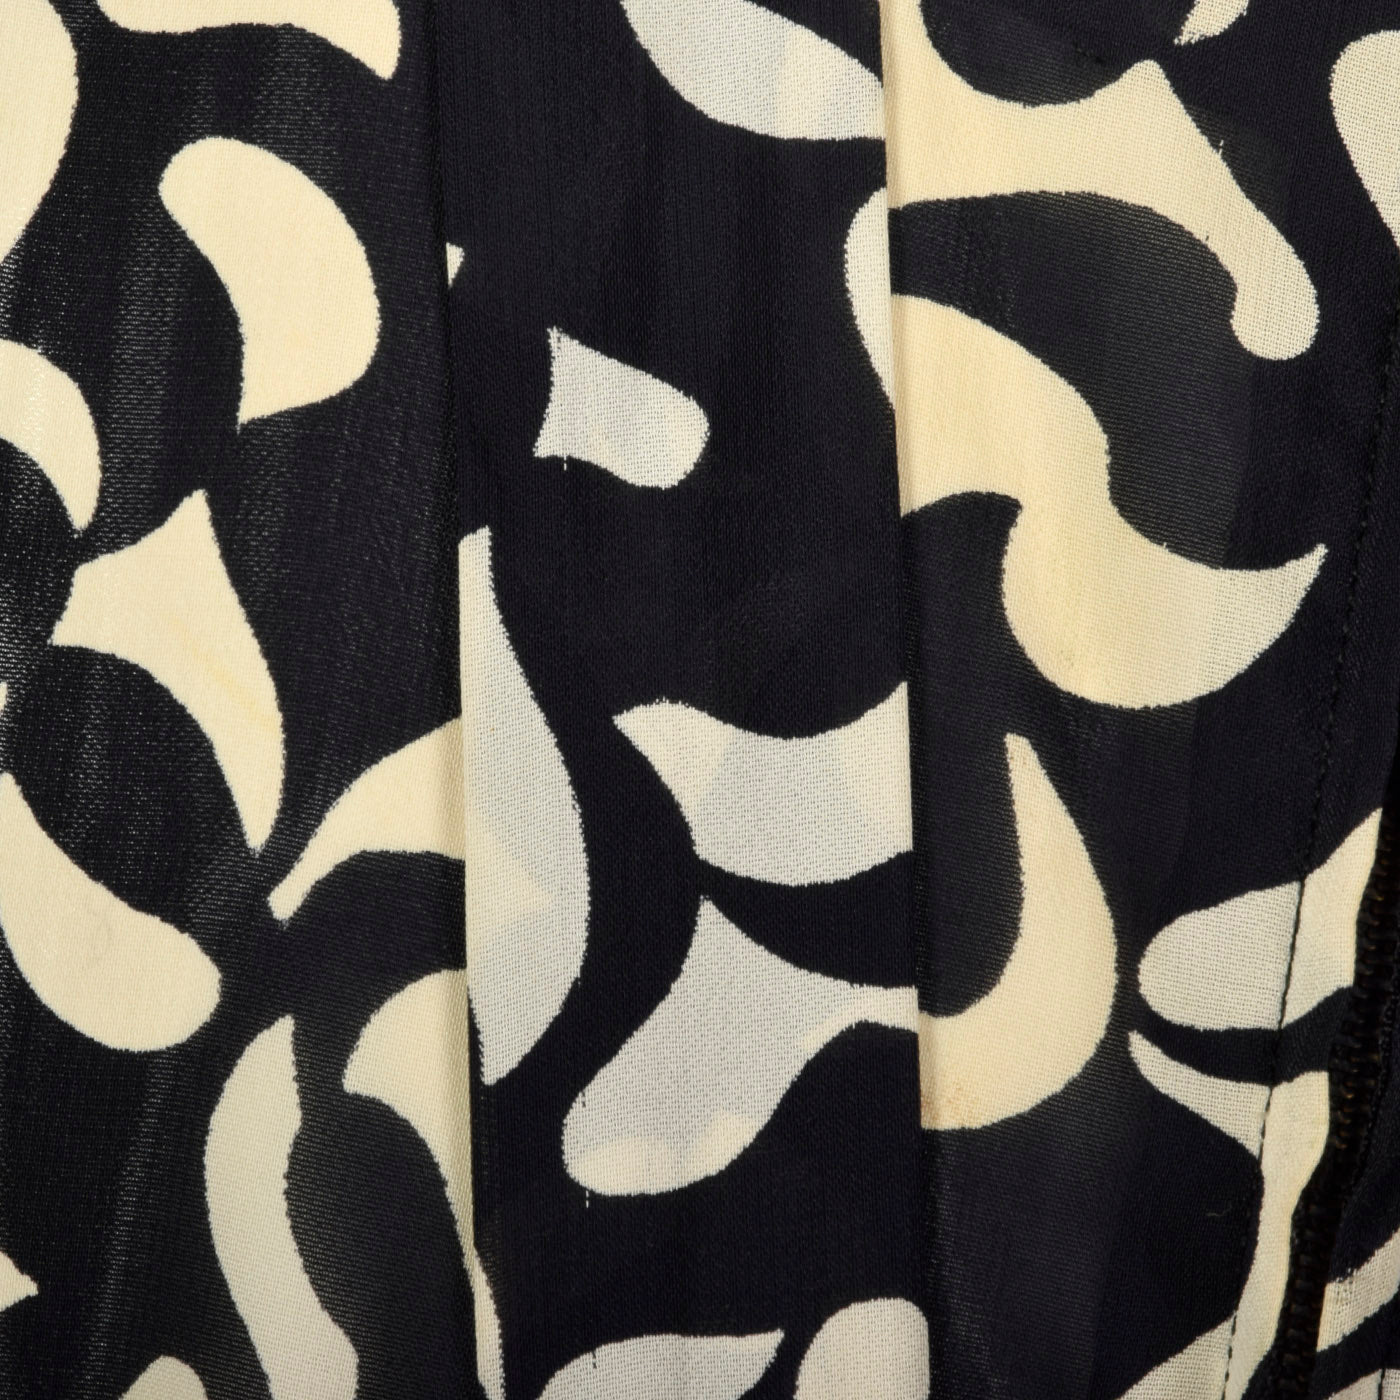 1940s Black and White Print Dress with Sheer Overlay